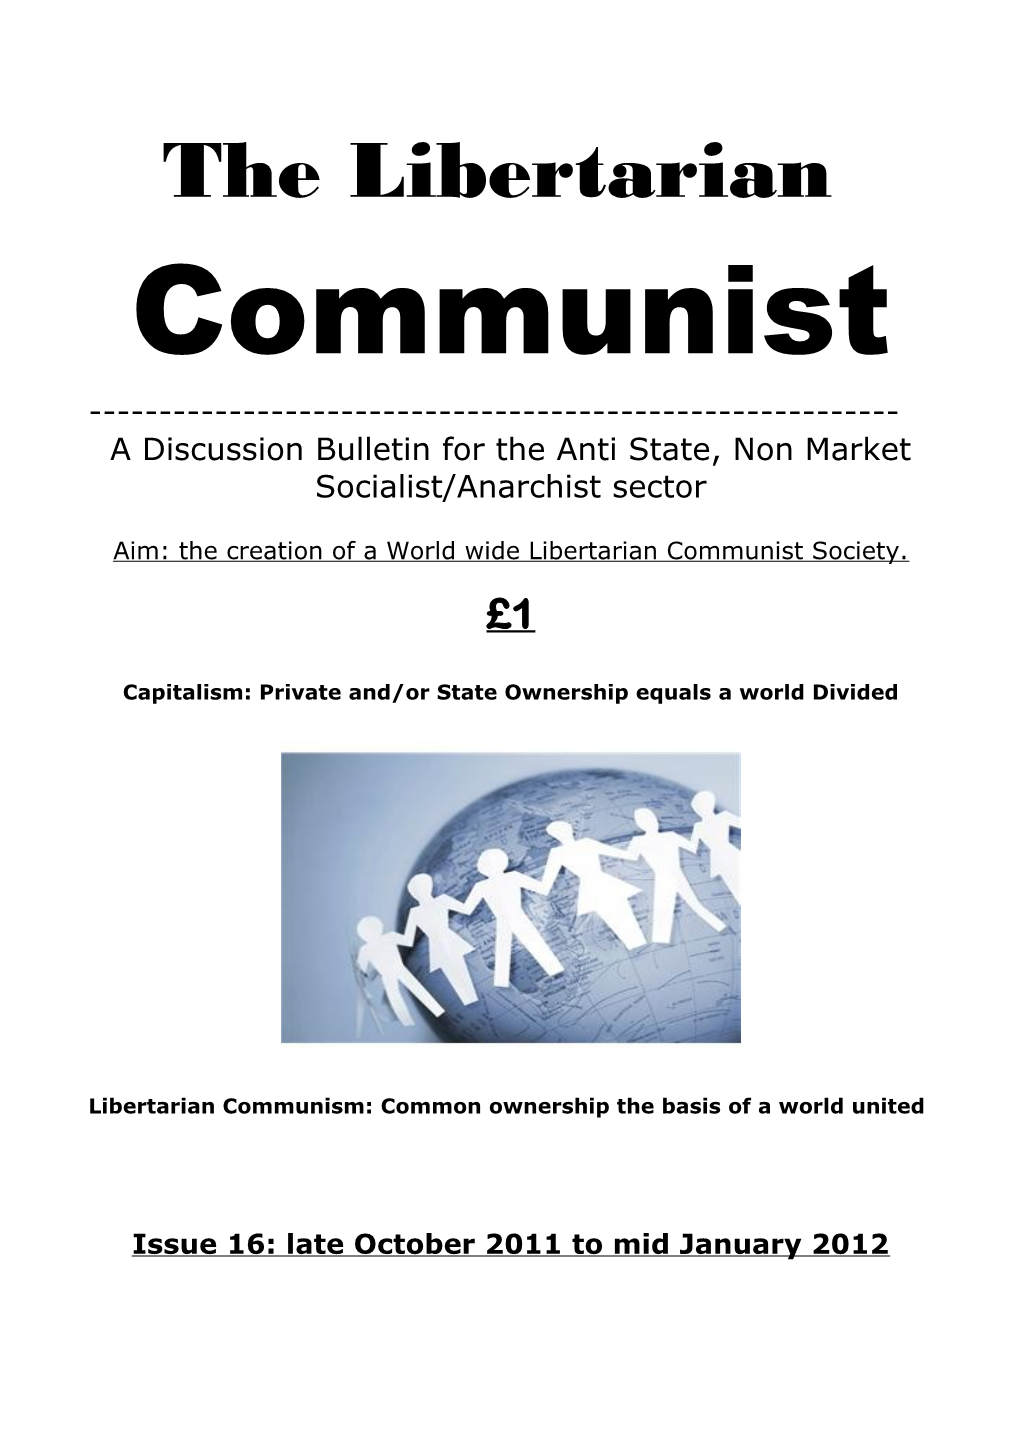 The Libertarian Communist ------A Discussion Bulletin for the Anti State, Non Market Socialist/Anarchist Sector